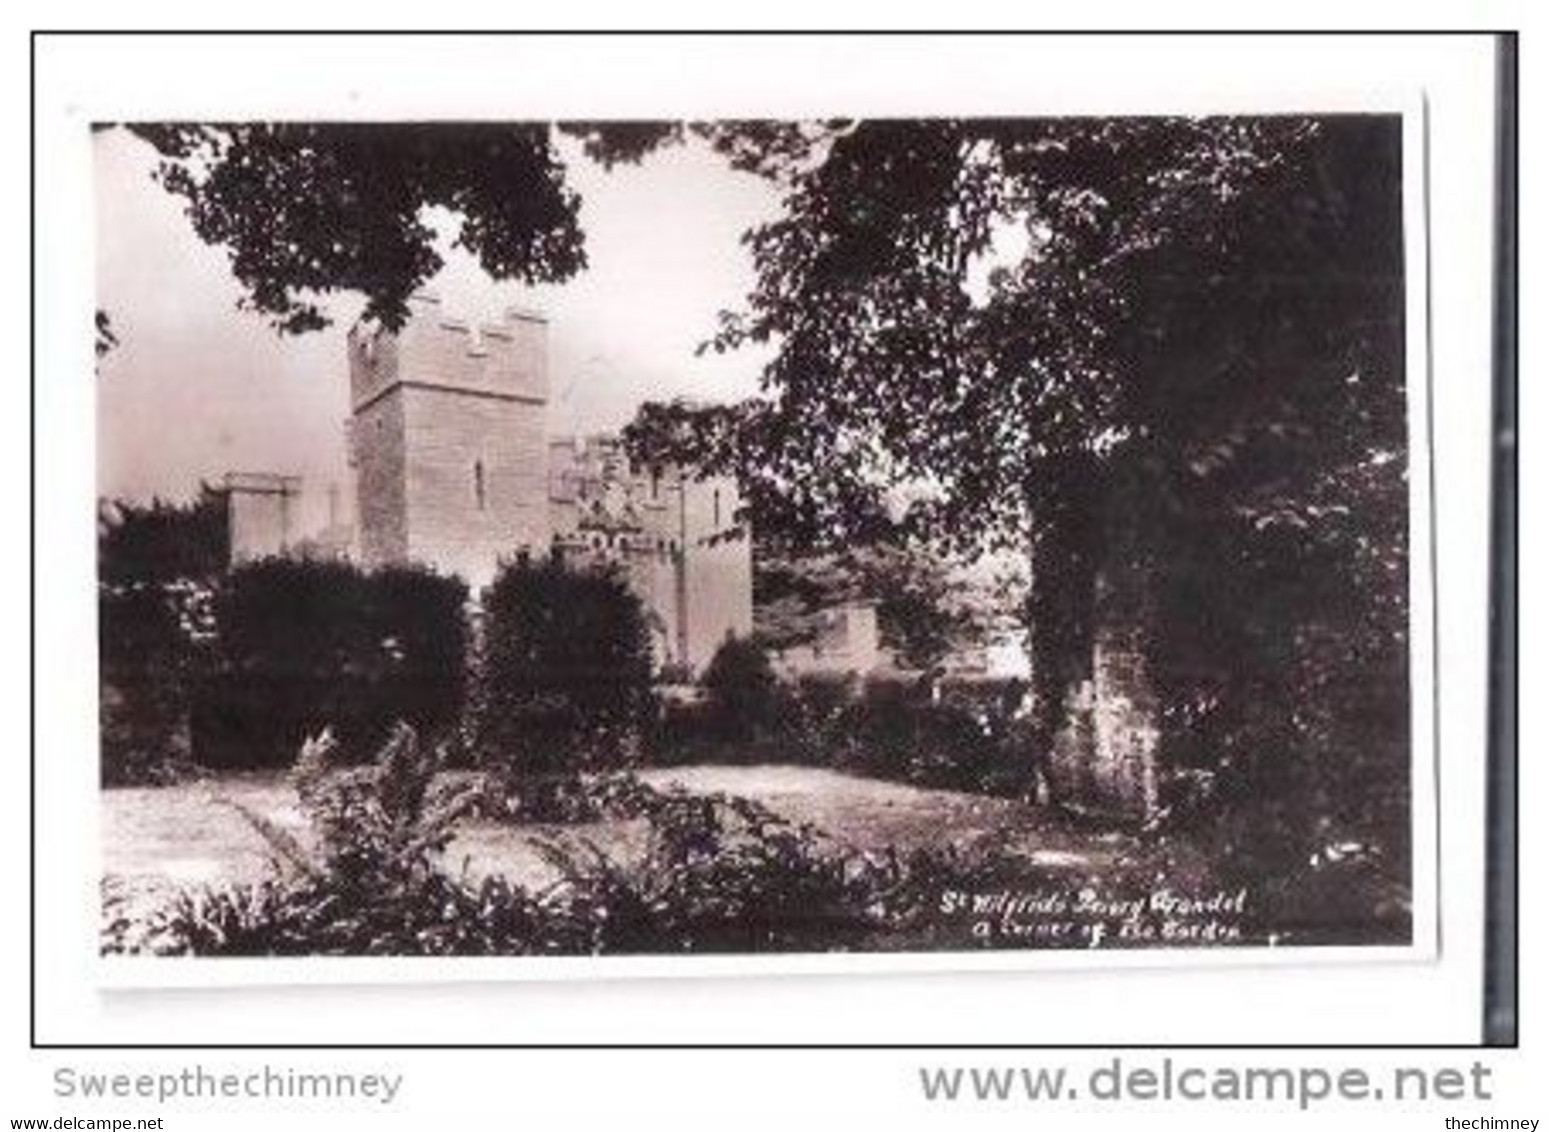 RP ST WILFRIDS PRIORY ARUNDEL  A CORNER OF THE GARDEN PHOTO CARD  REAL PHOTO POSTCARD SUSSEX - Arundel